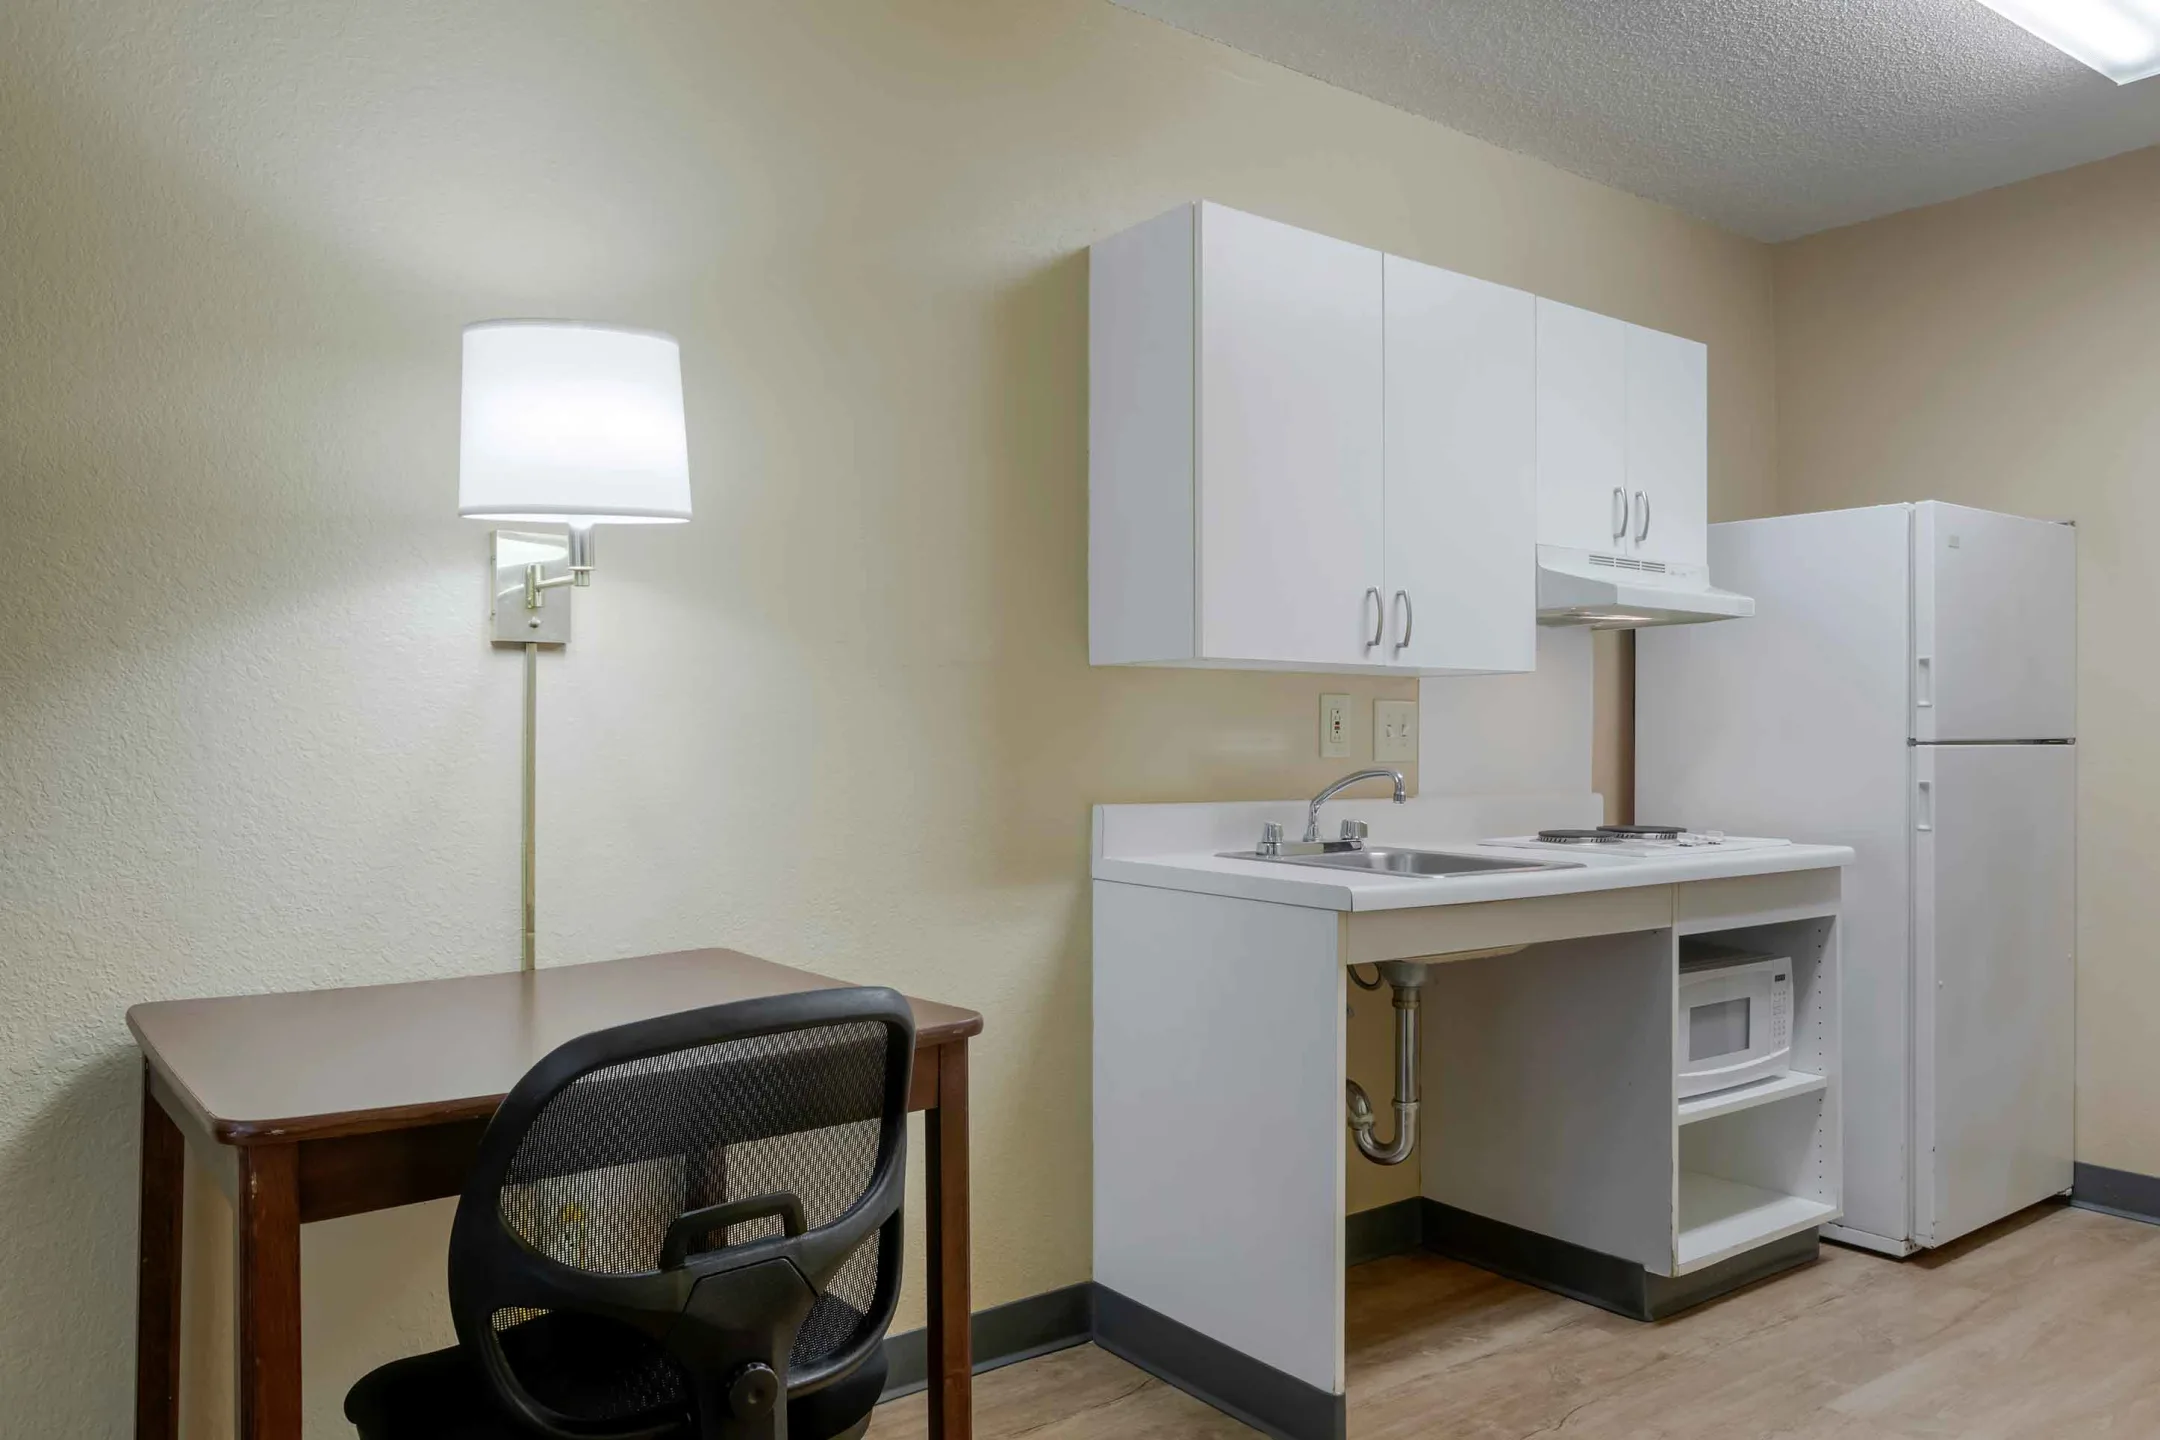 Kitchen - Furnished Studio - Indianapolis - West 86th St. - Indianapolis, IN